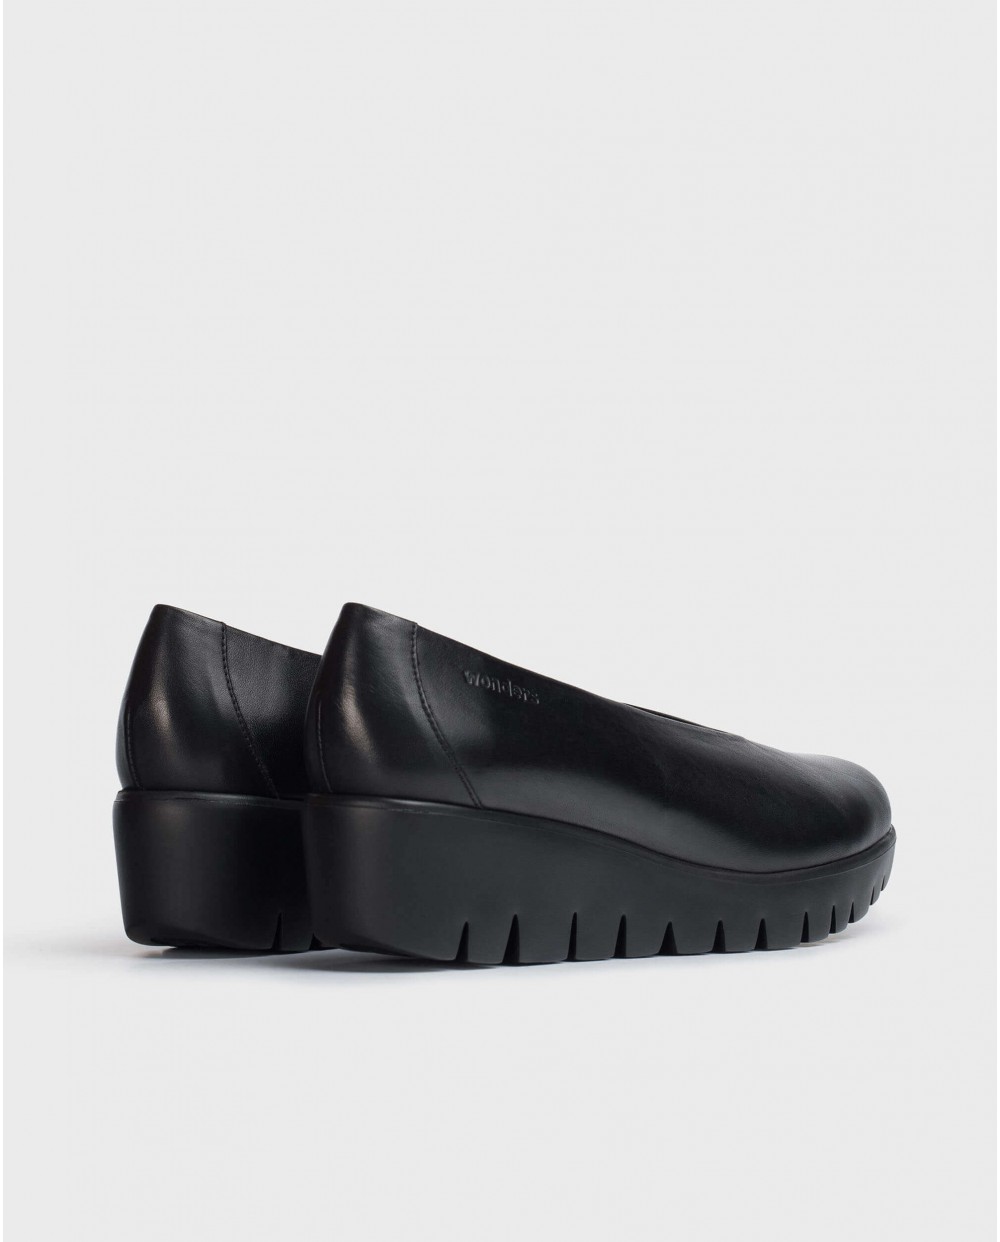 Wonders-New in-Black Fly Moccasin